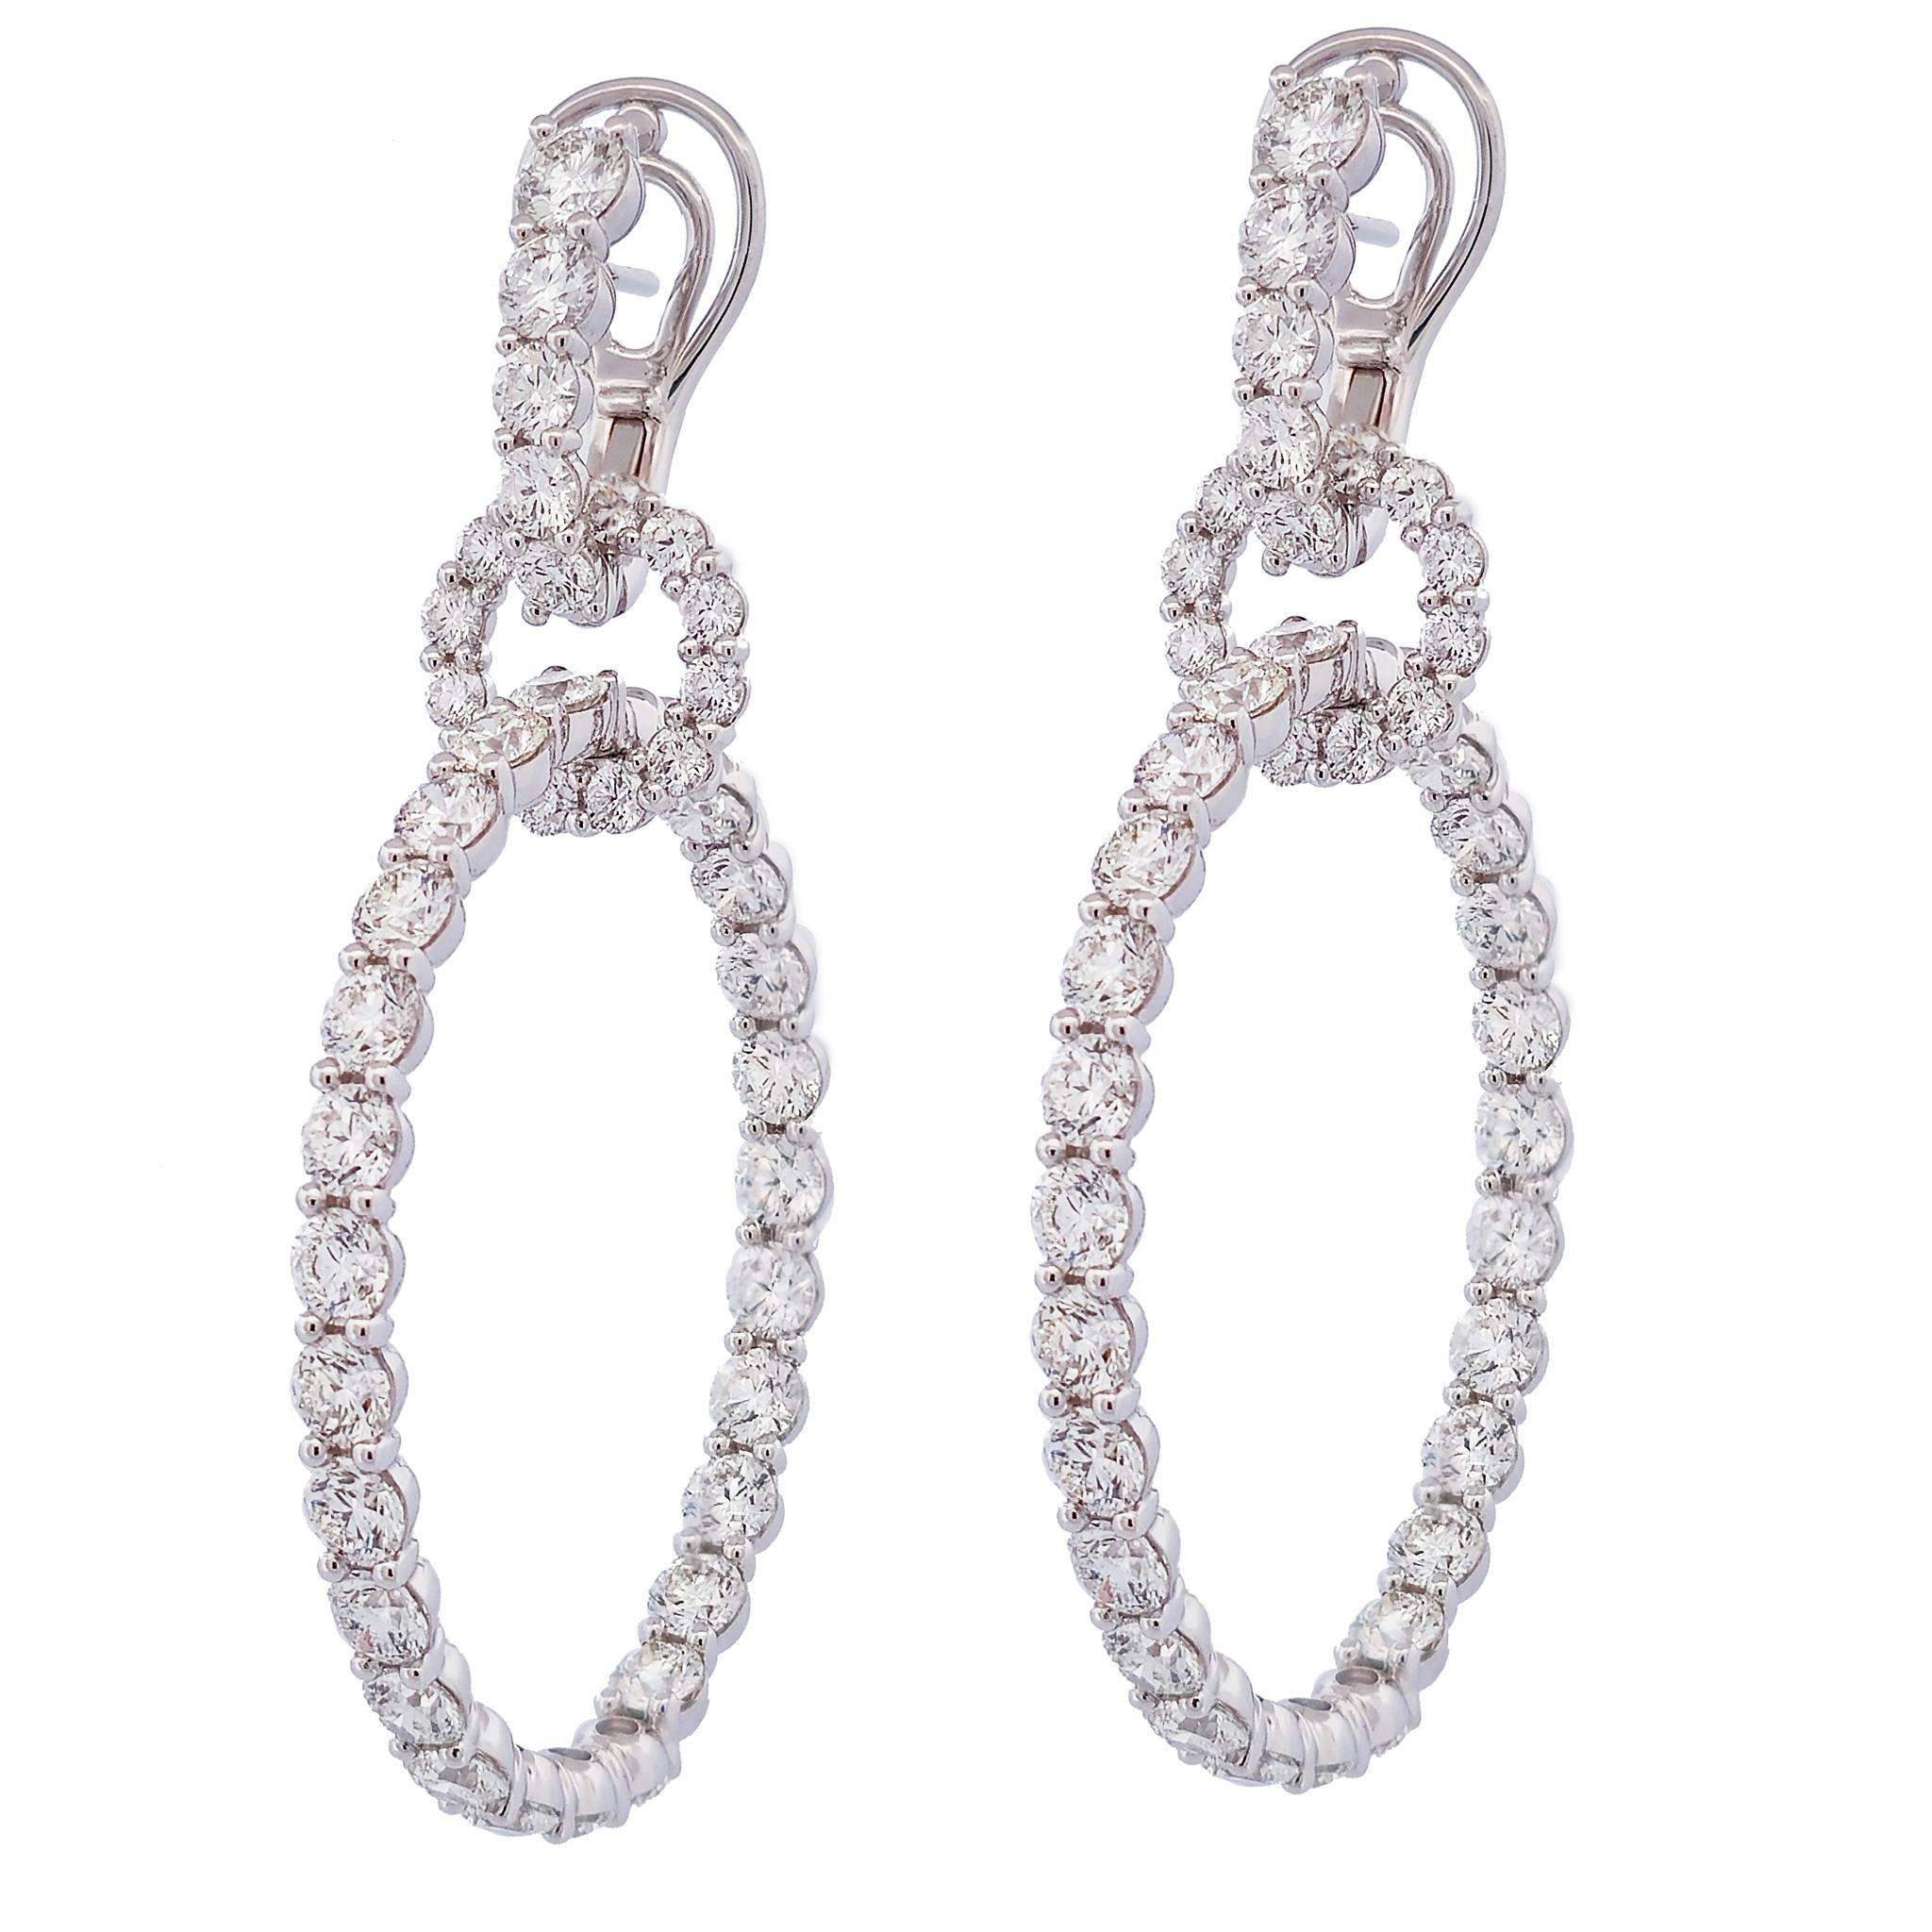 Glimmering 18 karat white gold earrings feature 13.46 carats of unforgettable F-VS diamonds, draping your lobes in incomparable luxury and sparkle!

These show stopping earring measure 60 mm in length.
The top circle measures 15 mm across.
The